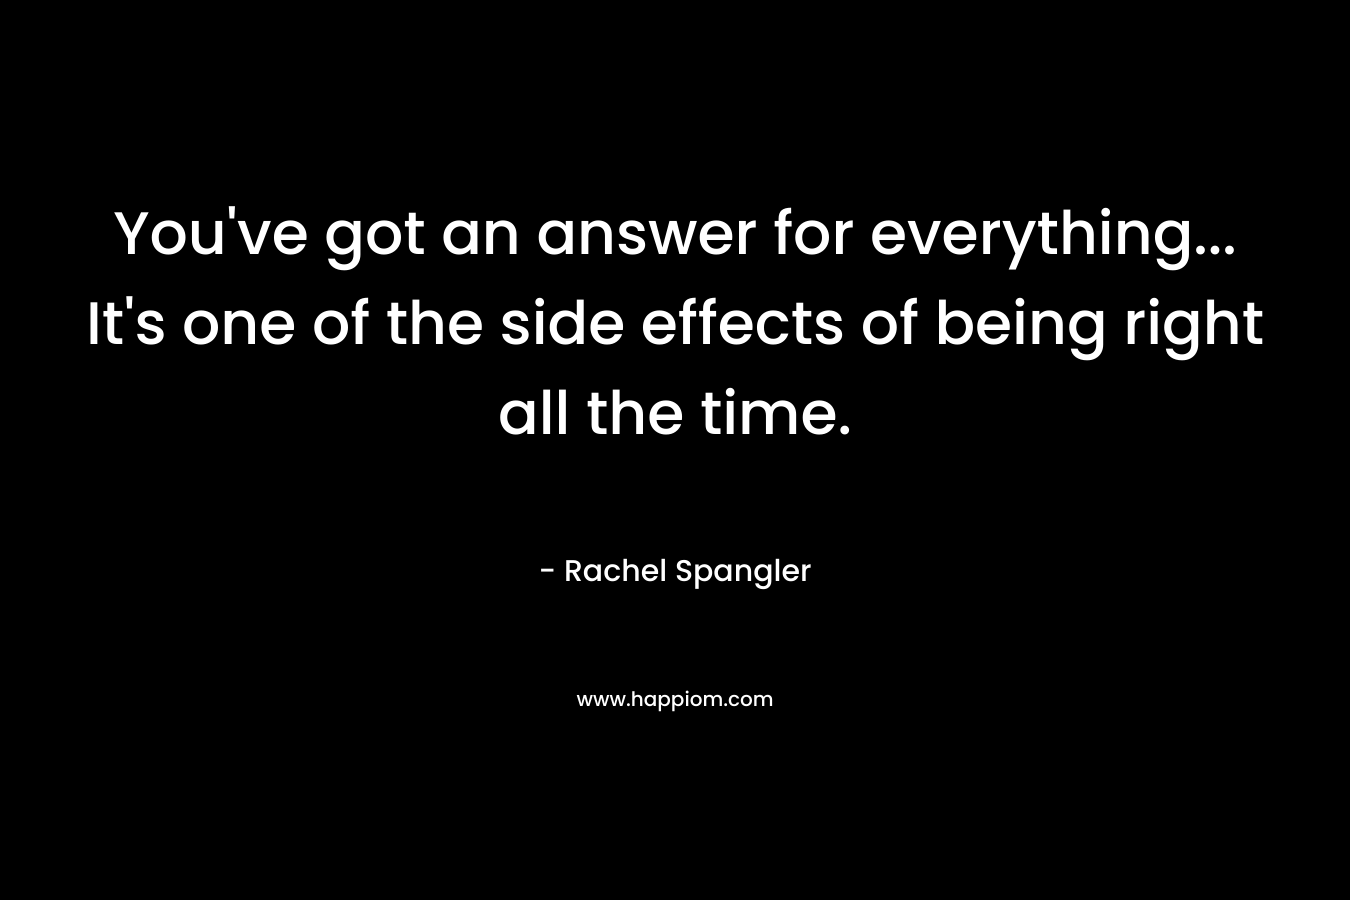 You've got an answer for everything... It's one of the side effects of being right all the time.